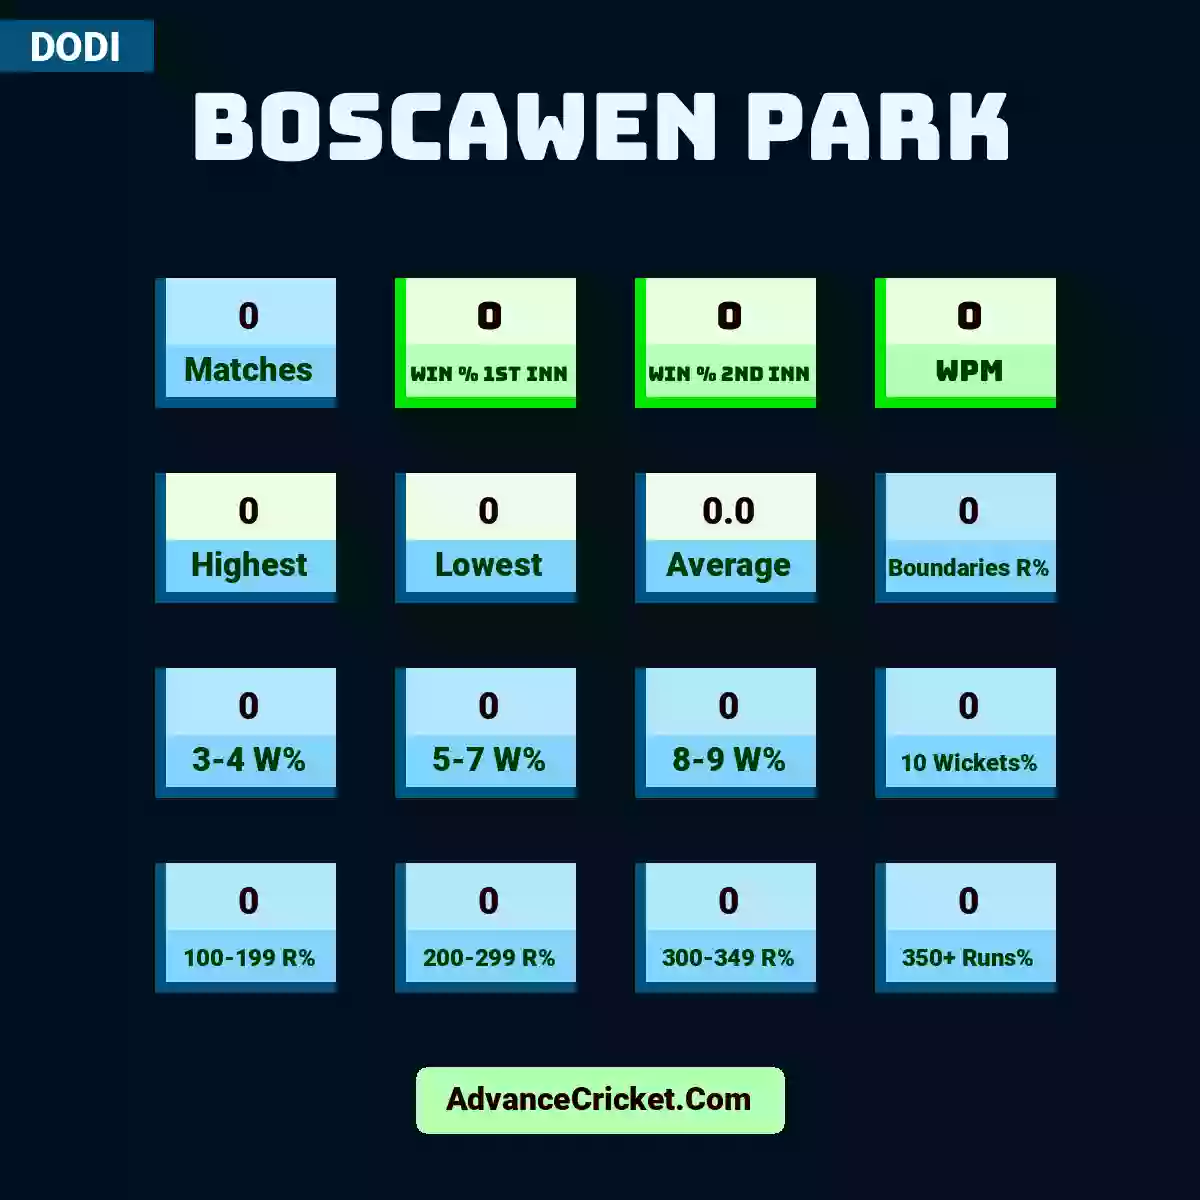 Image showing Boscawen Park with Matches: 0, Win % 1st Inn: 0, Win % 2nd Inn: 0, WPM: 0, Highest: 0, Lowest: 0, Average: 0.0, Boundaries R%: 0, 3-4 W%: 0, 5-7 W%: 0, 8-9 W%: 0, 10 Wickets%: 0, 100-199 R%: 0, 200-299 R%: 0, 300-349 R%: 0, 350+ Runs%: 0.